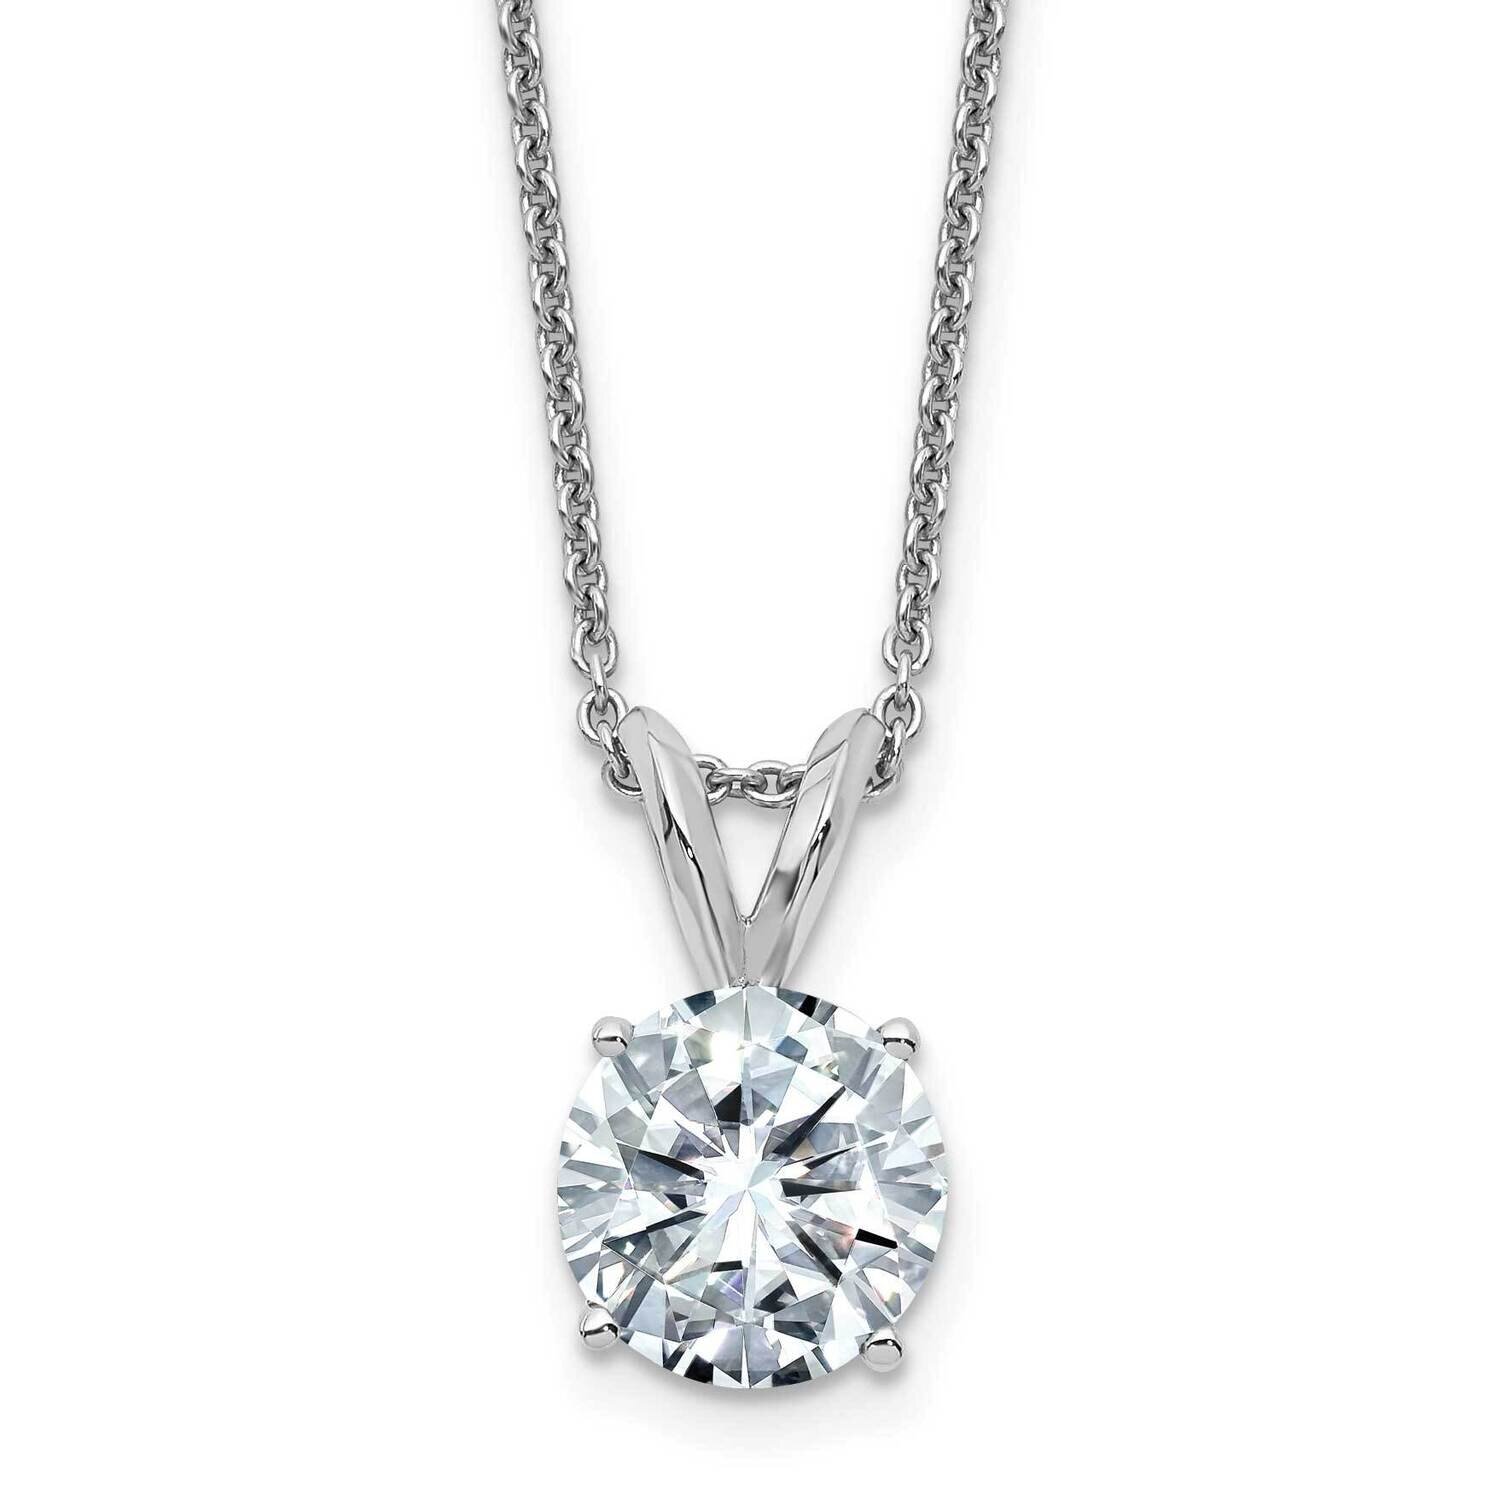 2ct. 8.0mm Round D E F Pure Light Moissanite Solitaire Necklace 14k White Gold WG936-12MP